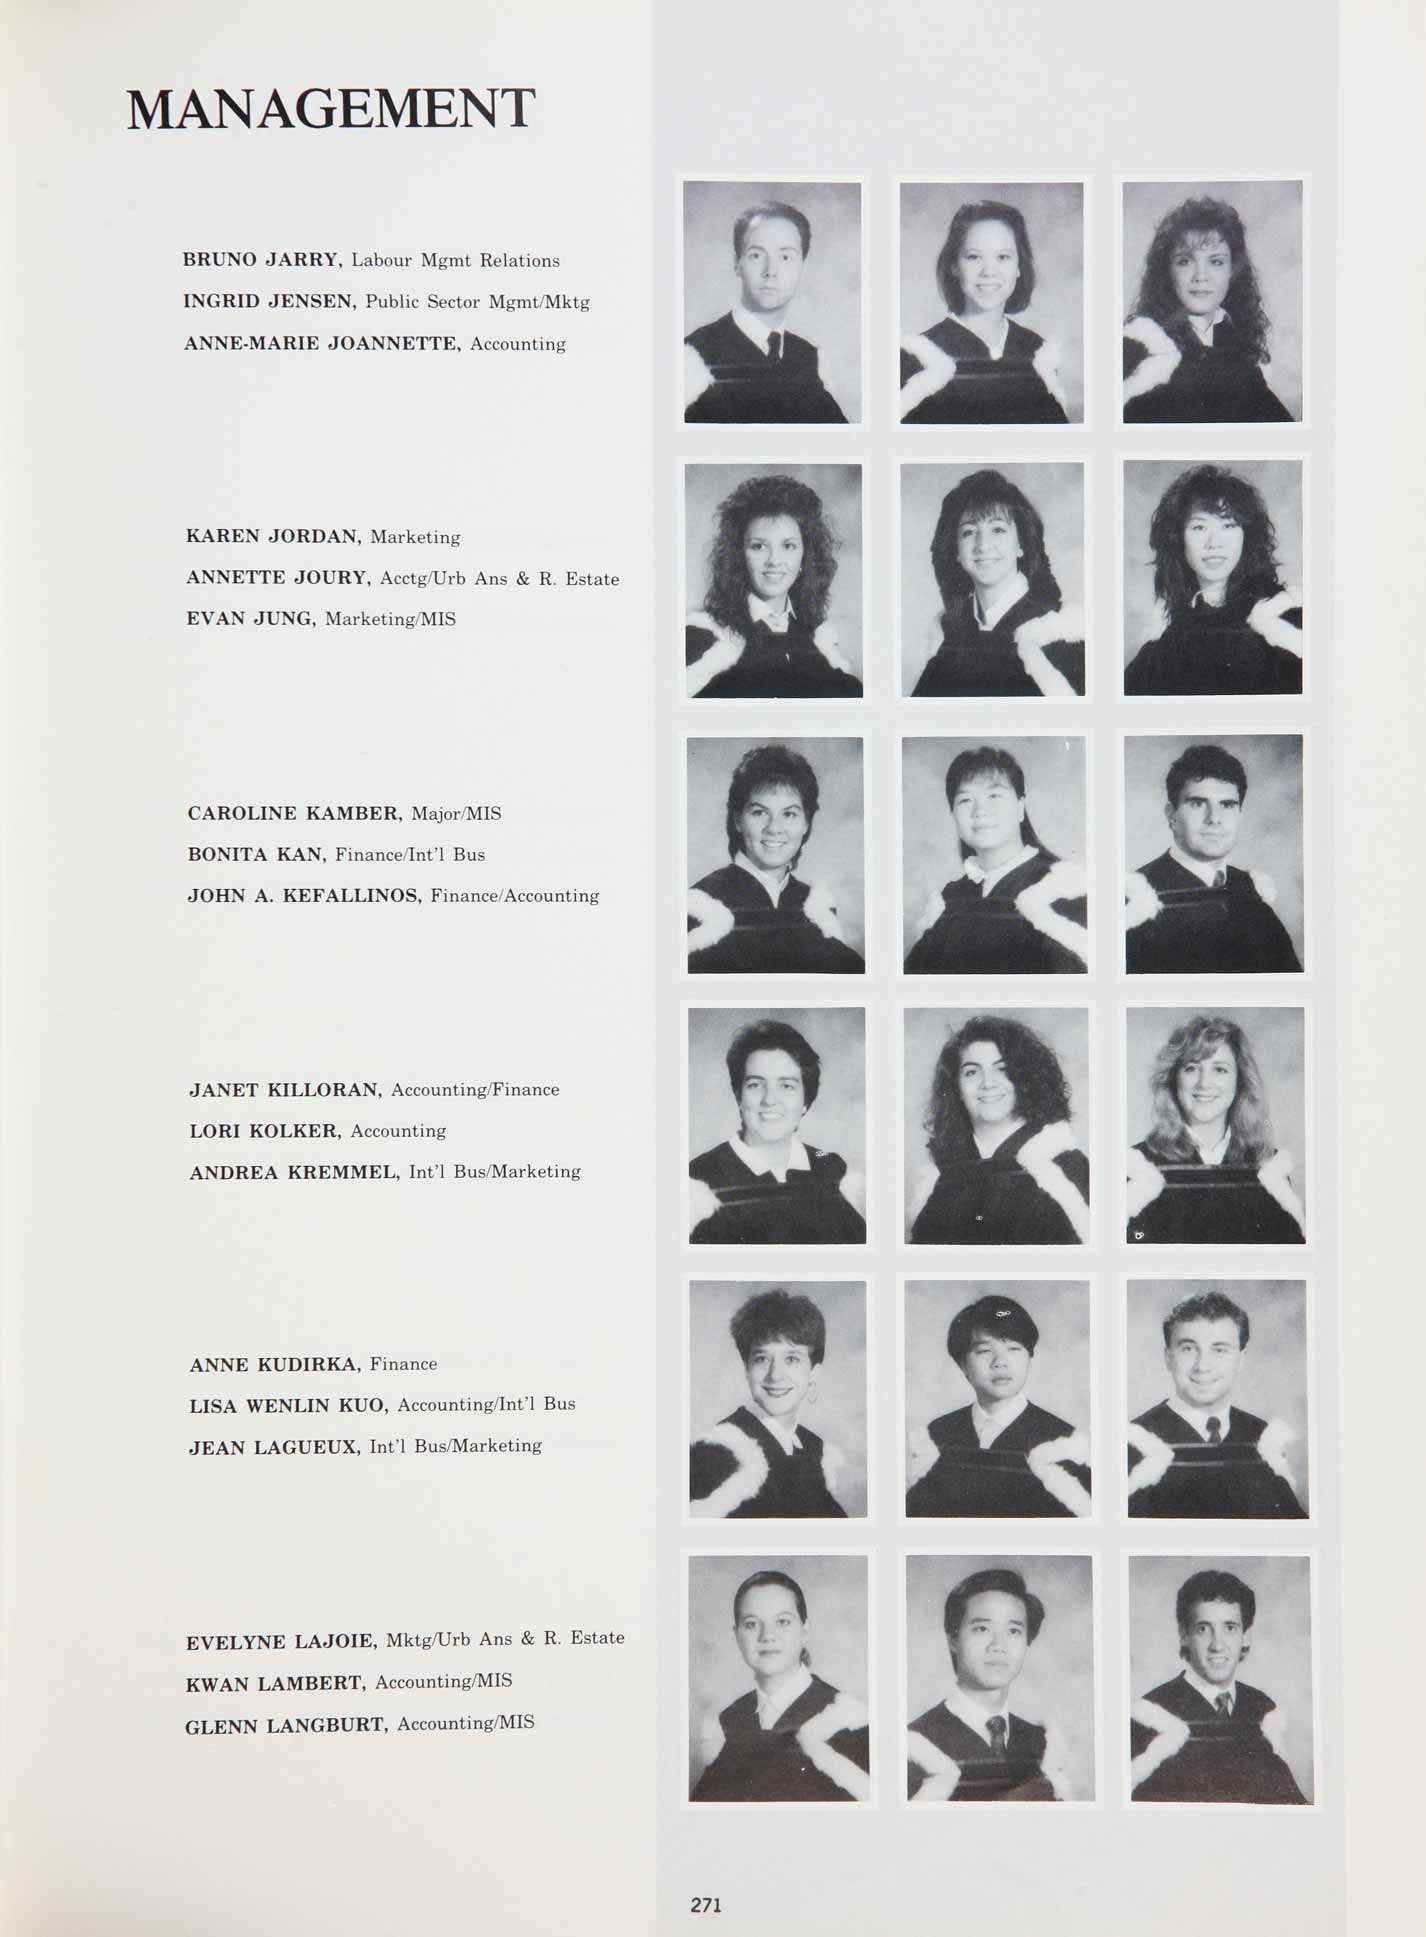 McGill Yearbook: 1989